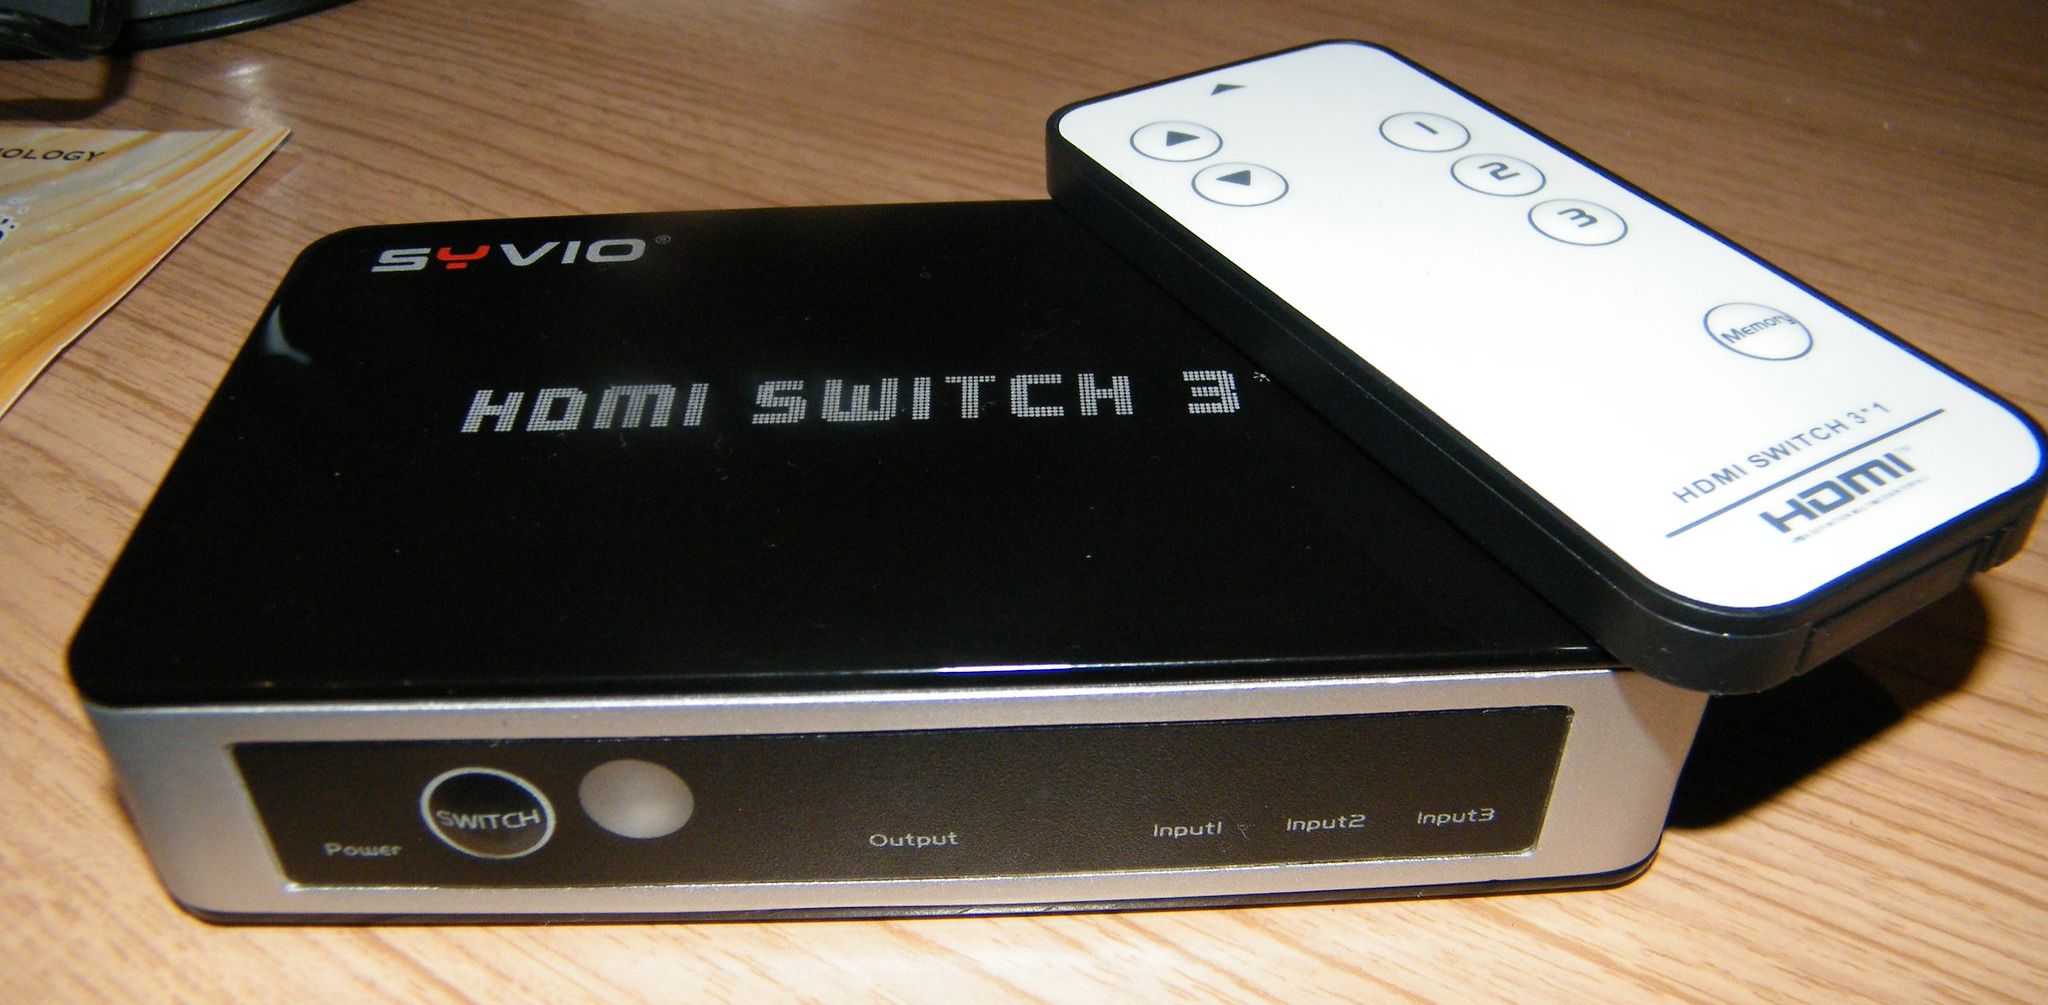 picture of hdmi switch 3 device with remote